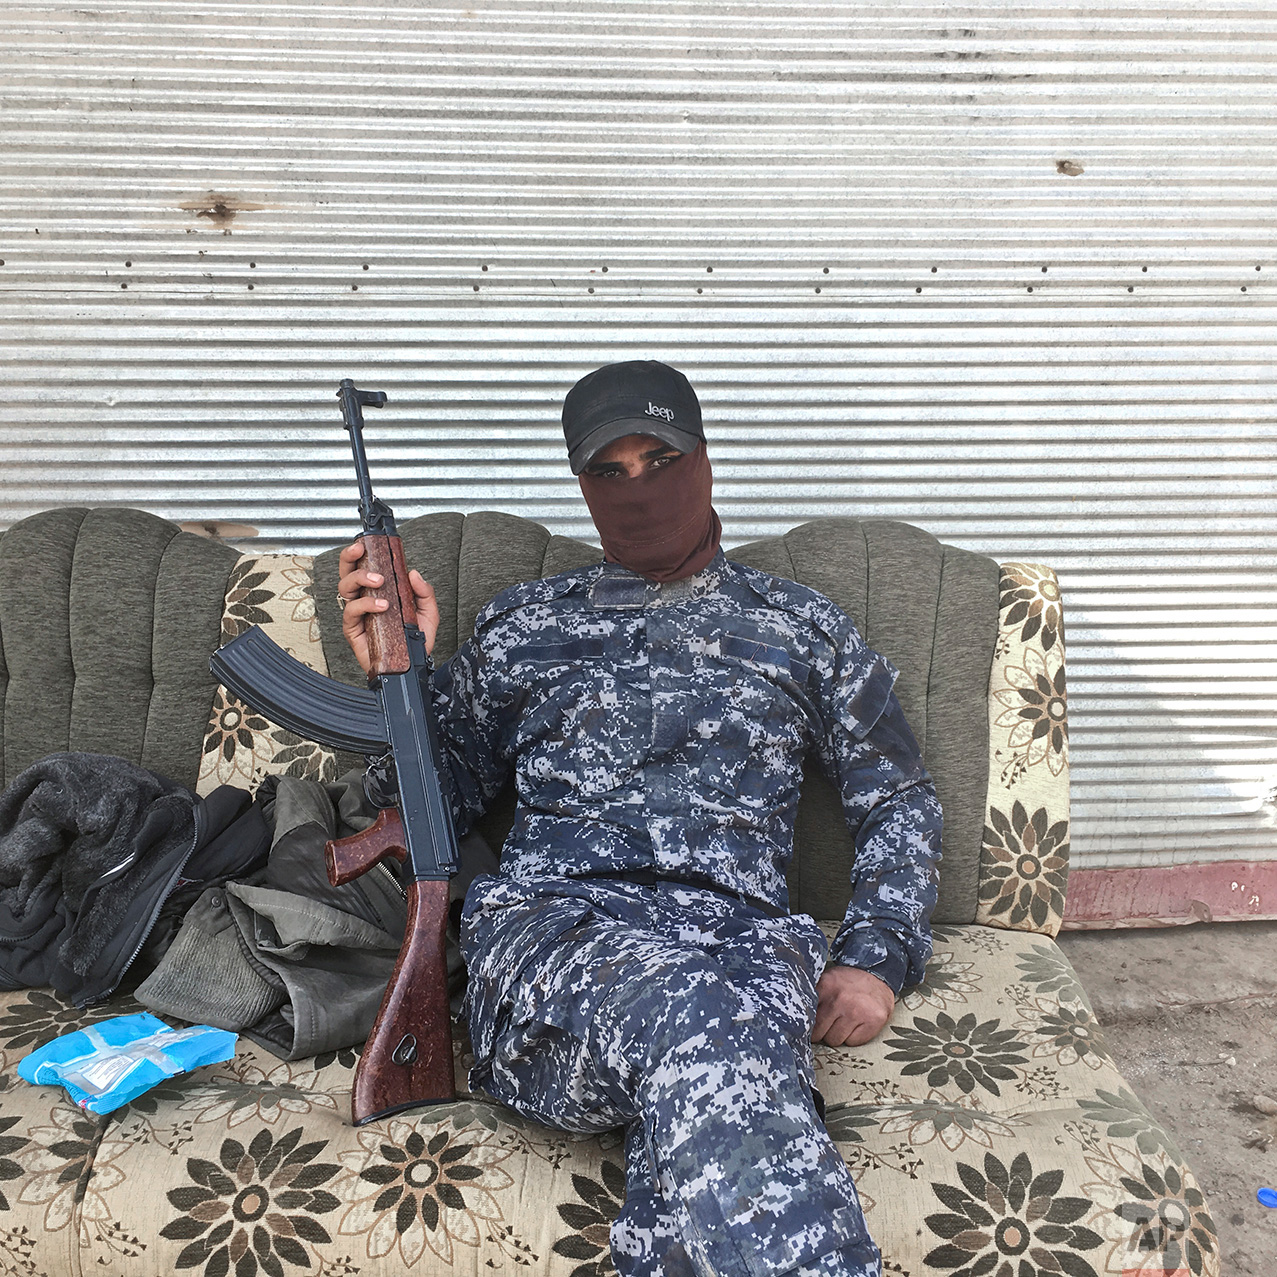 In this photo taken Thursday, Oct. 27, 2016,  Abdelyusef, no last name given, an Iraqi Federal Police officer, poses for a portrait at a checkpoint in the village of Al Hut, some 40 kilometers south of Mosul, Iraq. The push to kick the Islamic State out of Mosul has brought together an eclectic mix of Iraqis, young and old, police and soldiers, and a variety of irregular uniforms and equipment. (AP Photo/Marko Drobnjakovic)